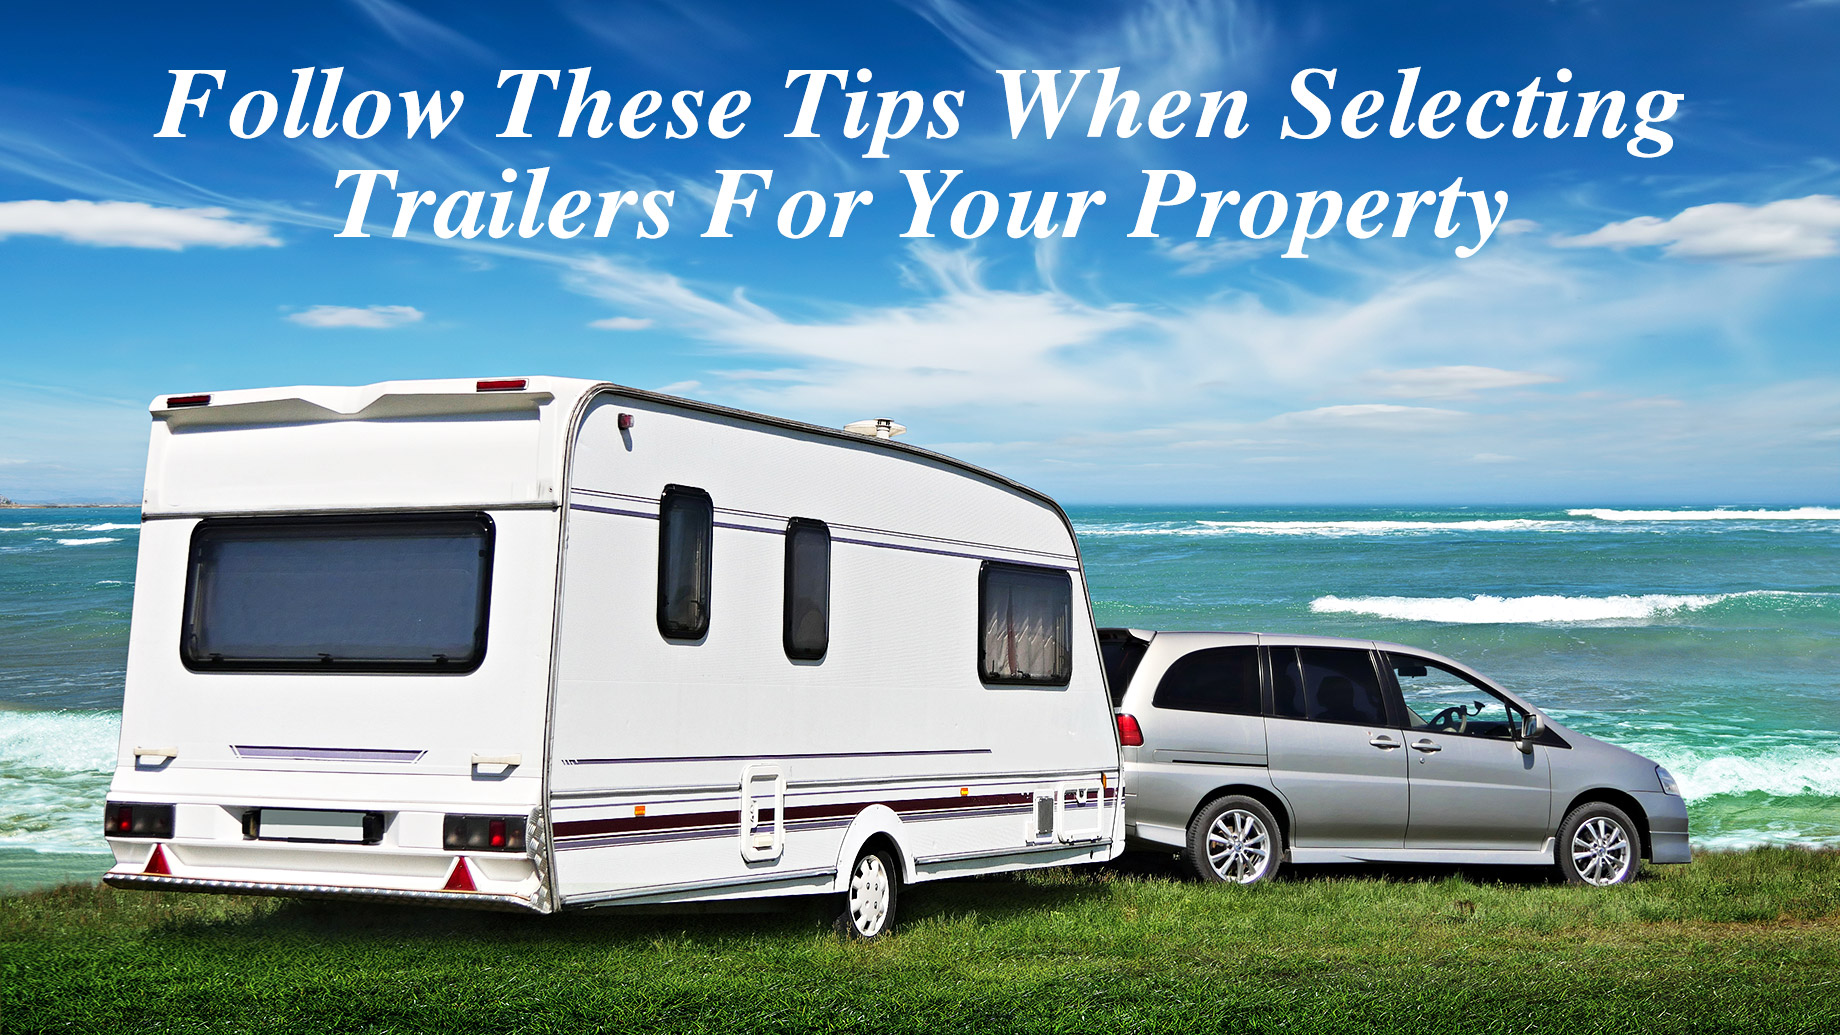 Follow These Tips When Selecting Trailers For Your Property